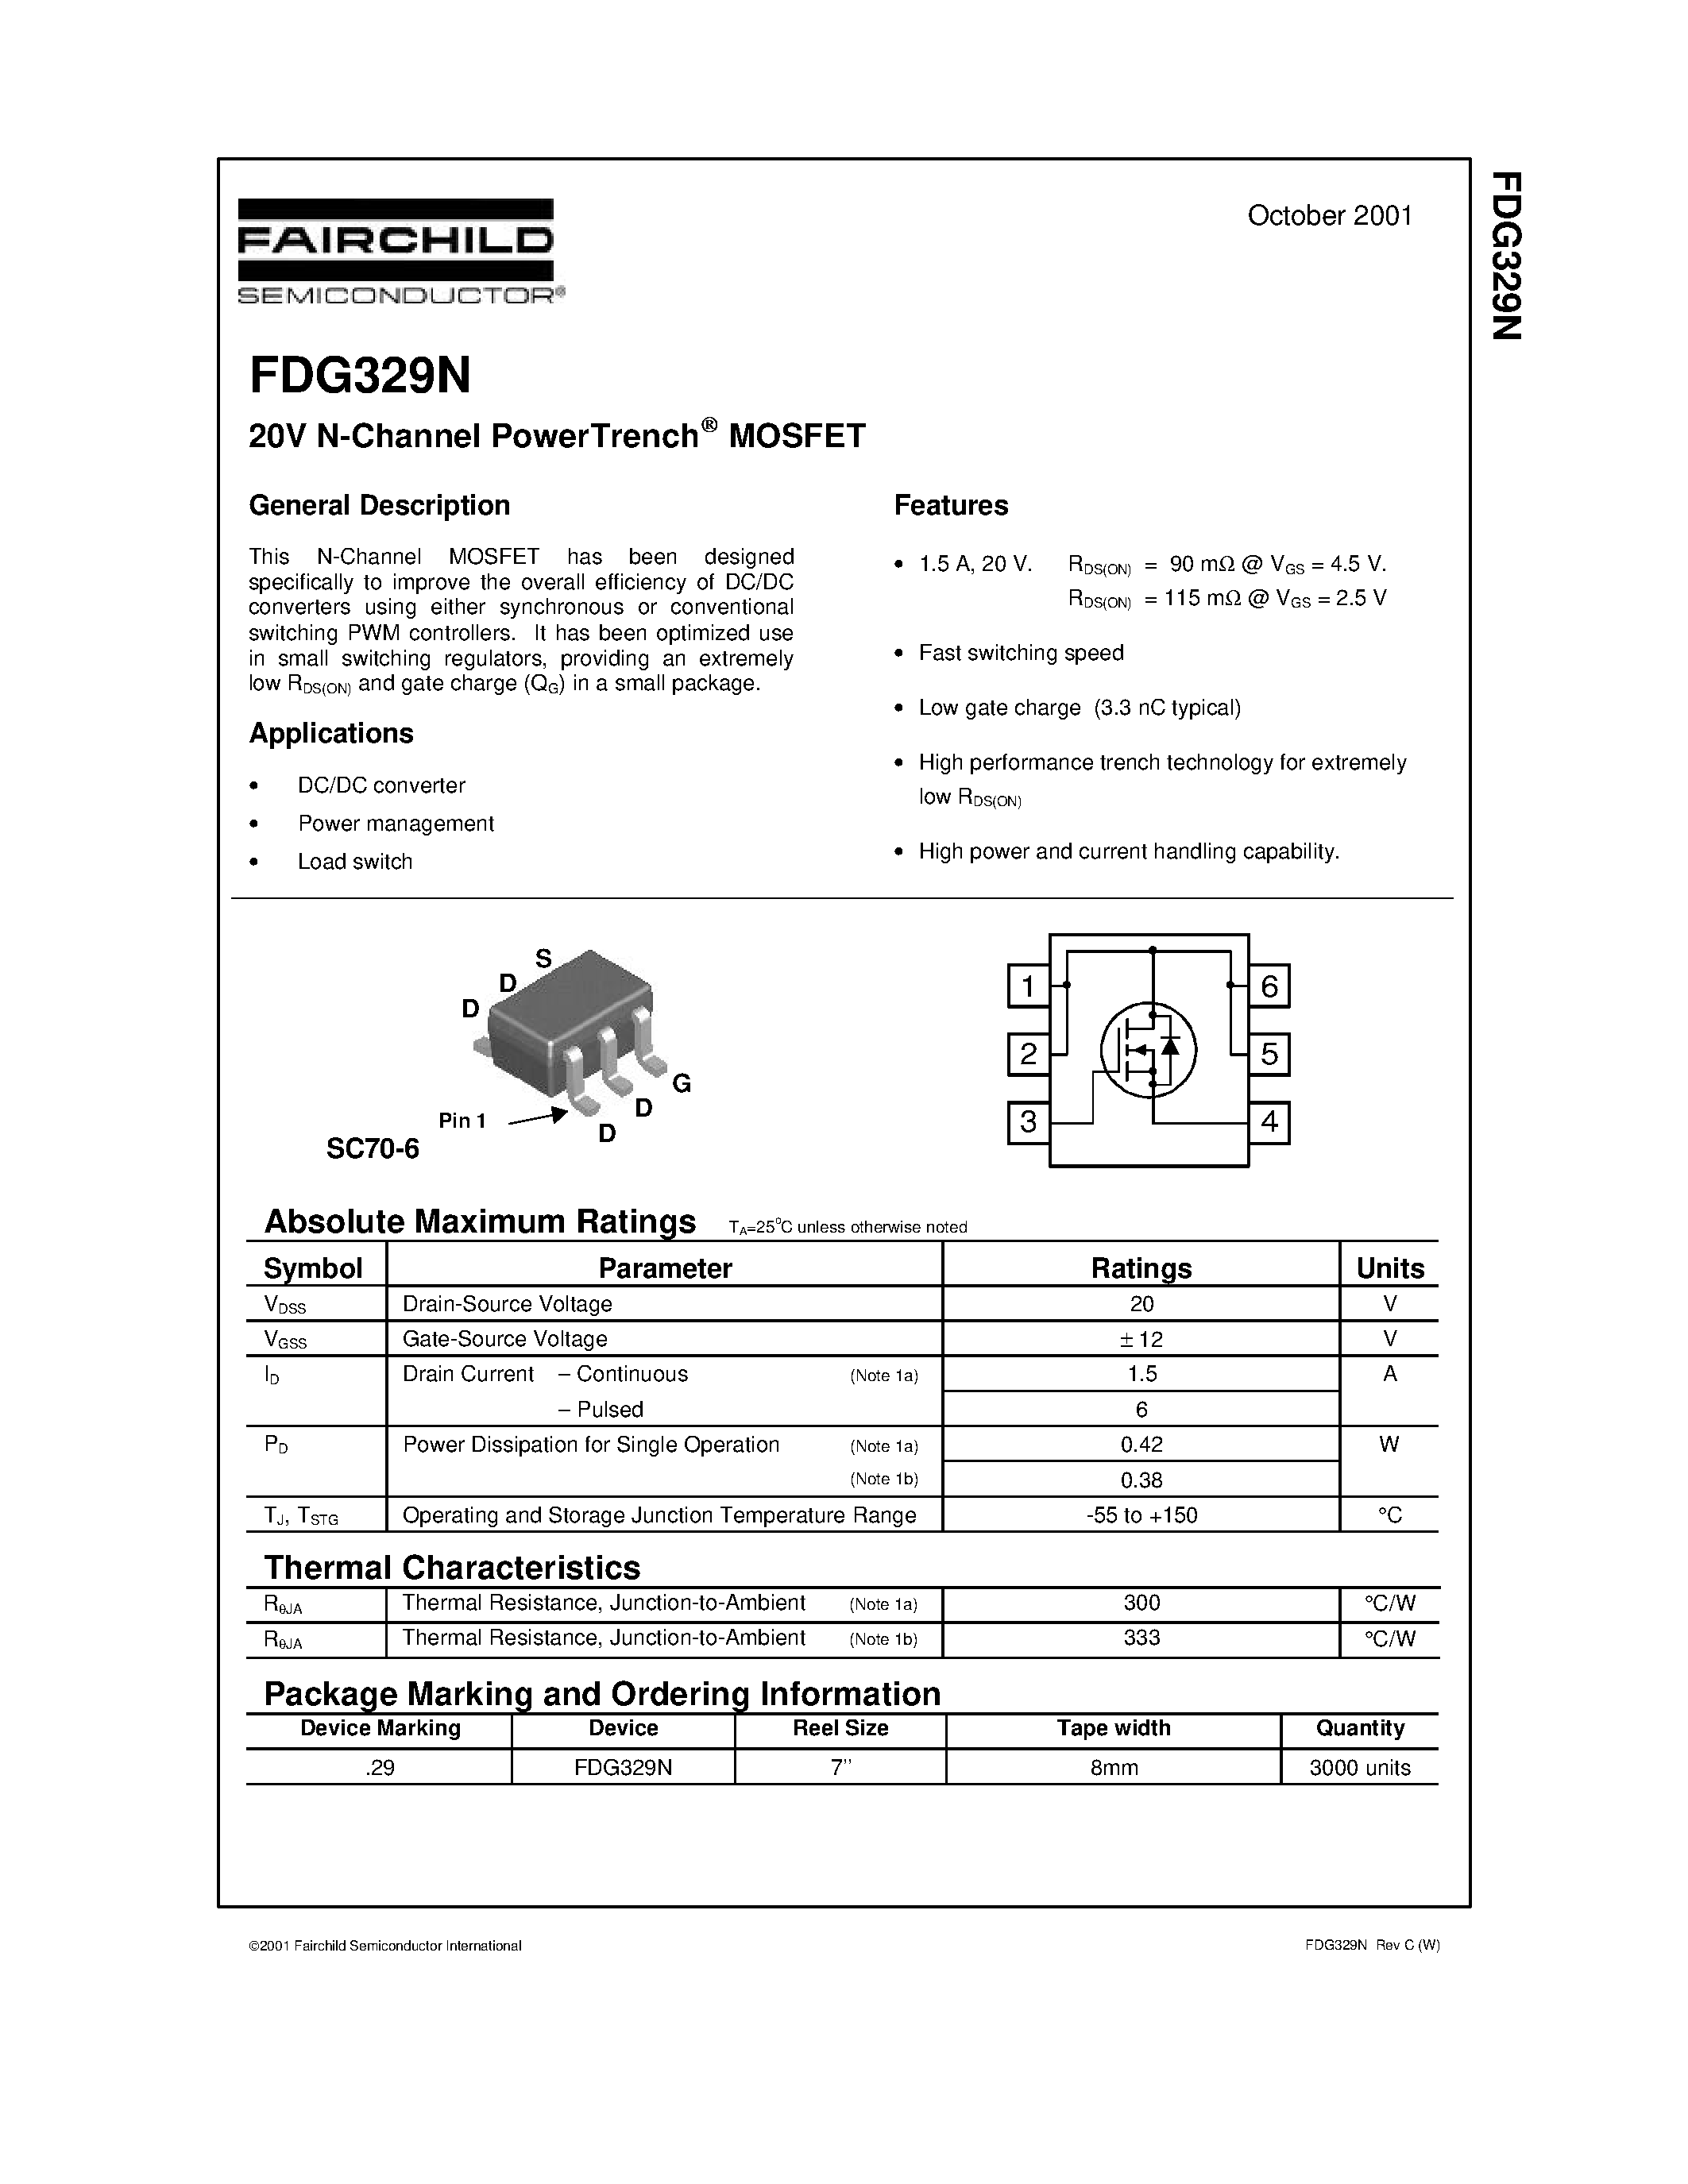 Даташит FDG329N - 20V N-Channel PowerTrench MOSFET страница 1